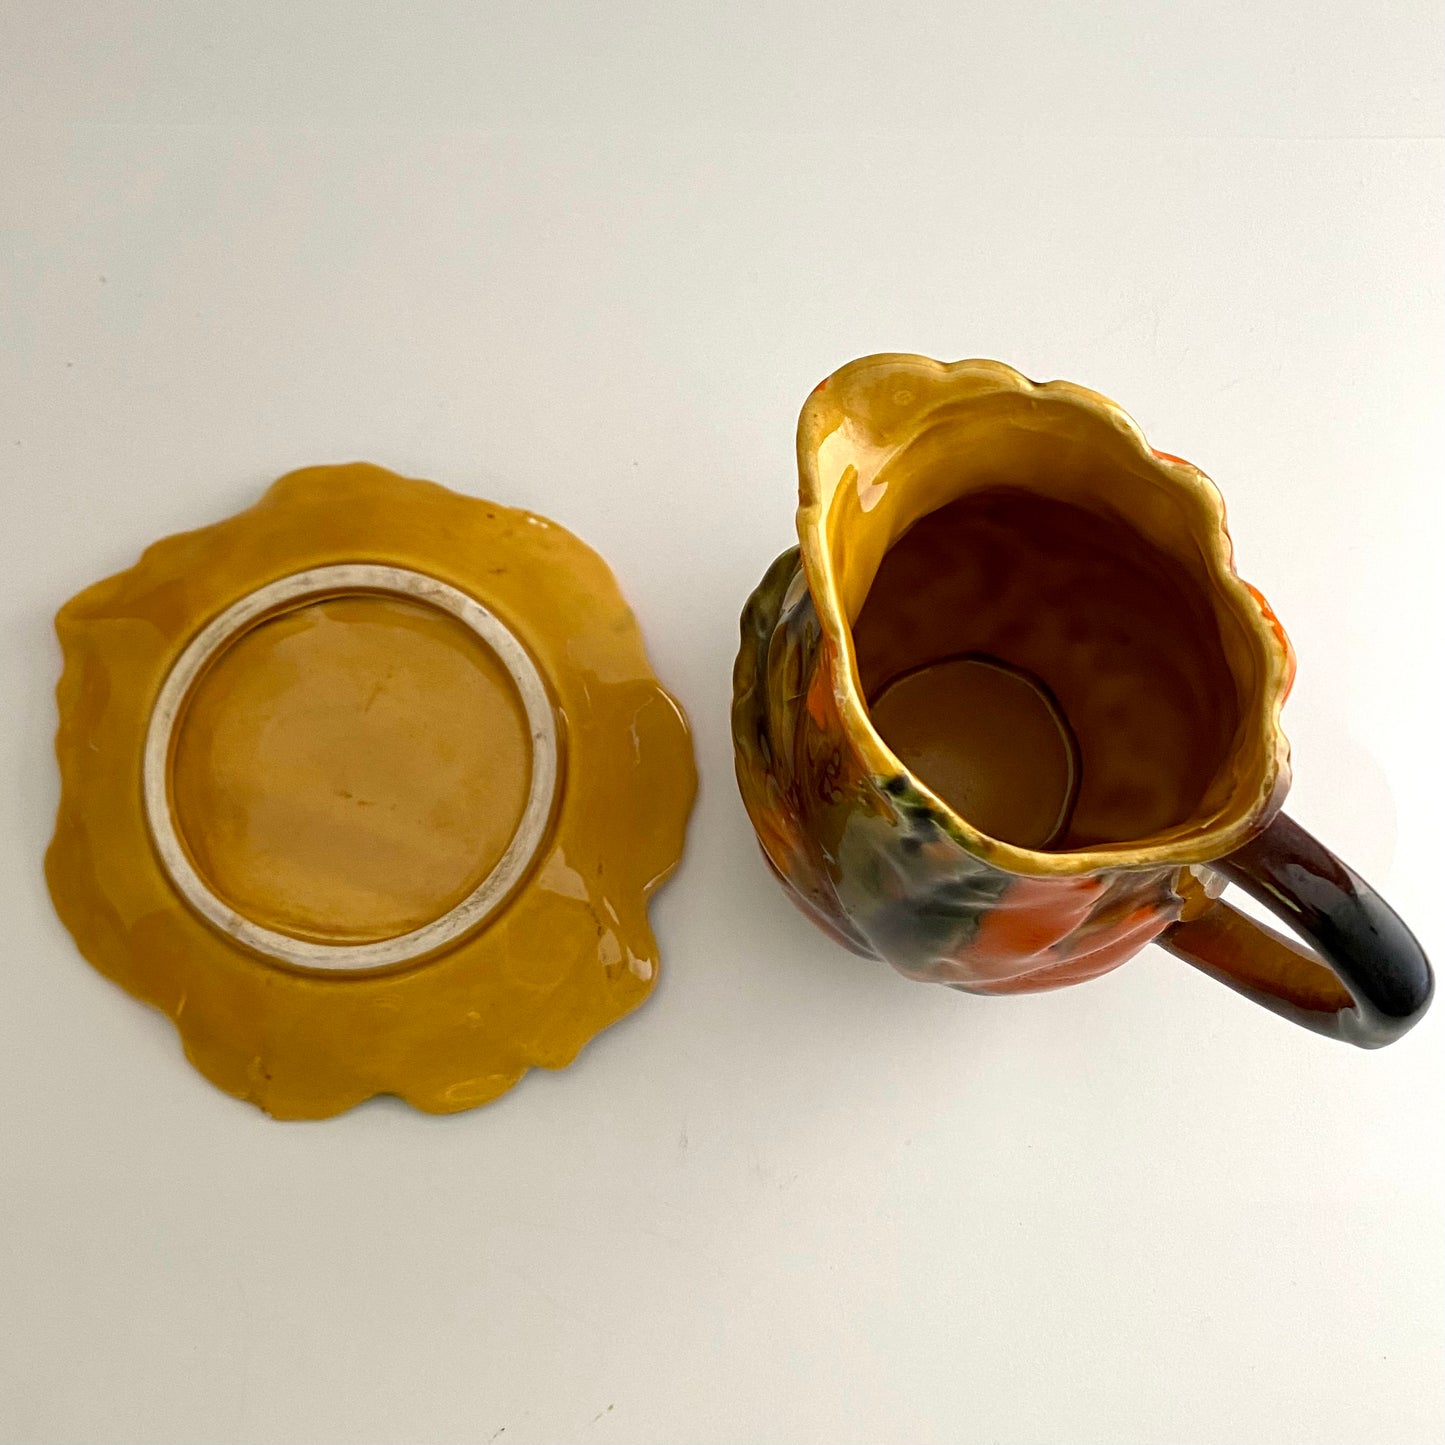 Late 60s/ Early 70s Relpo 6276 Leaf Patterned Creamer & Saucer